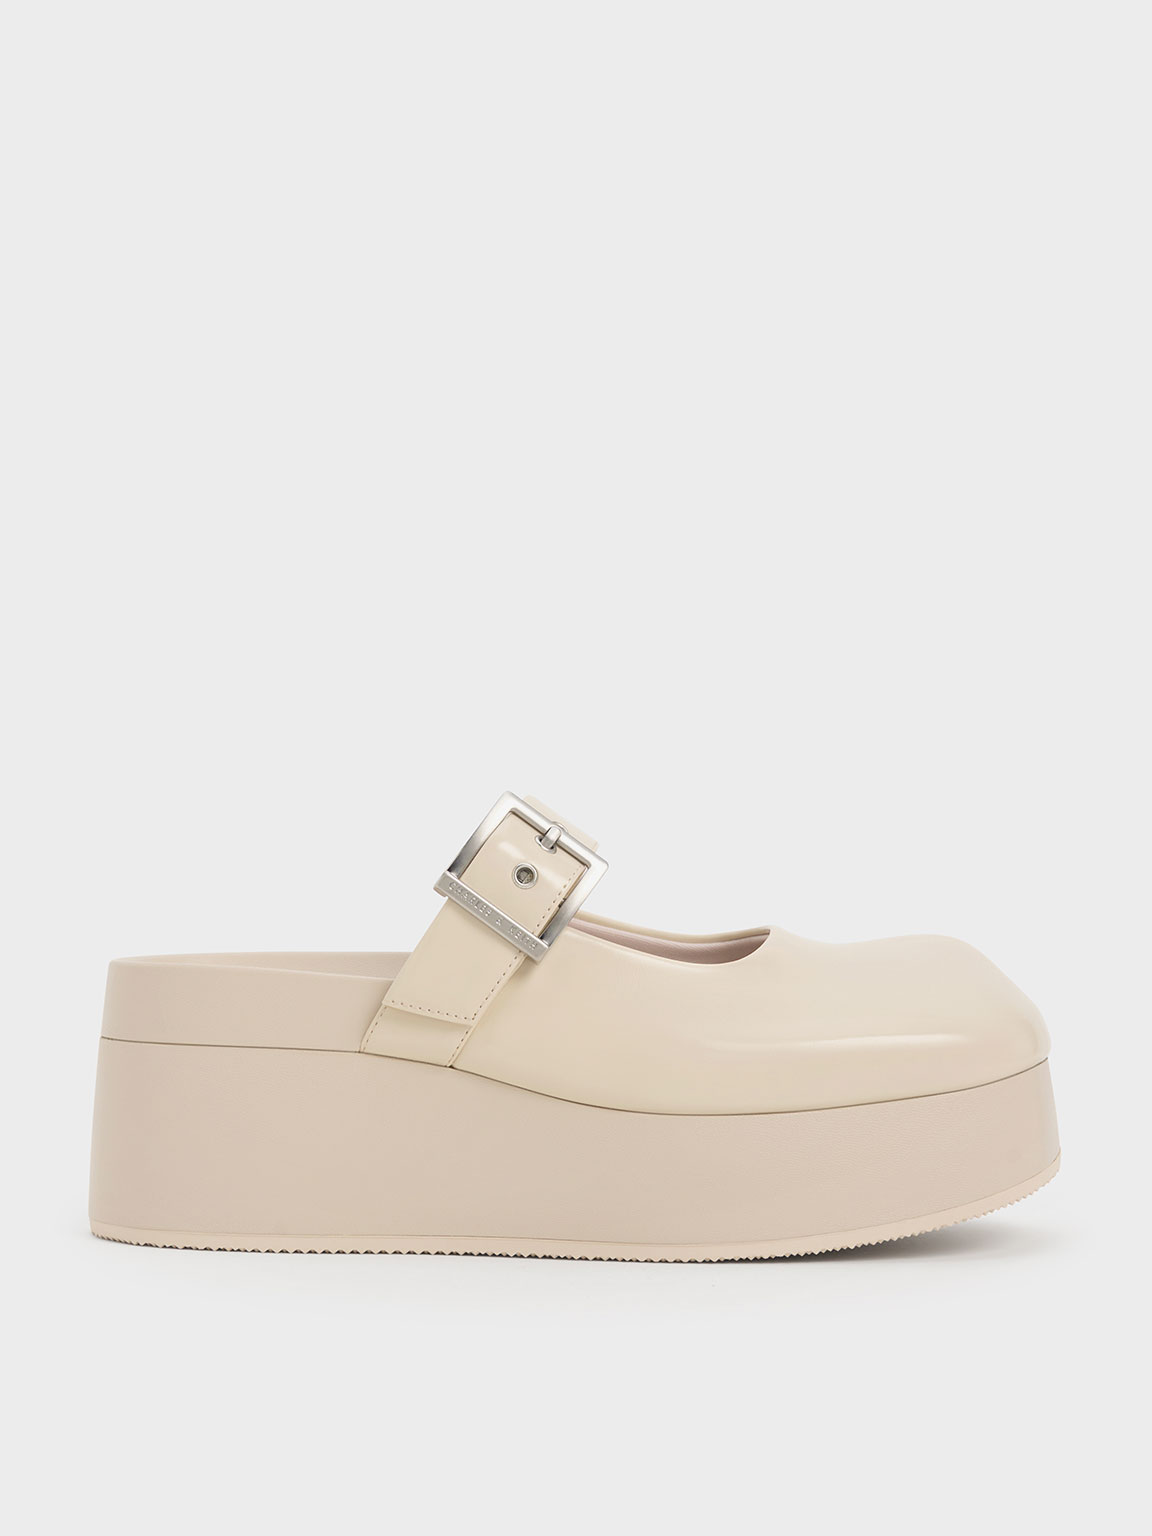 Charles & Keith Buckle-strap Flatform Mules In Chalk